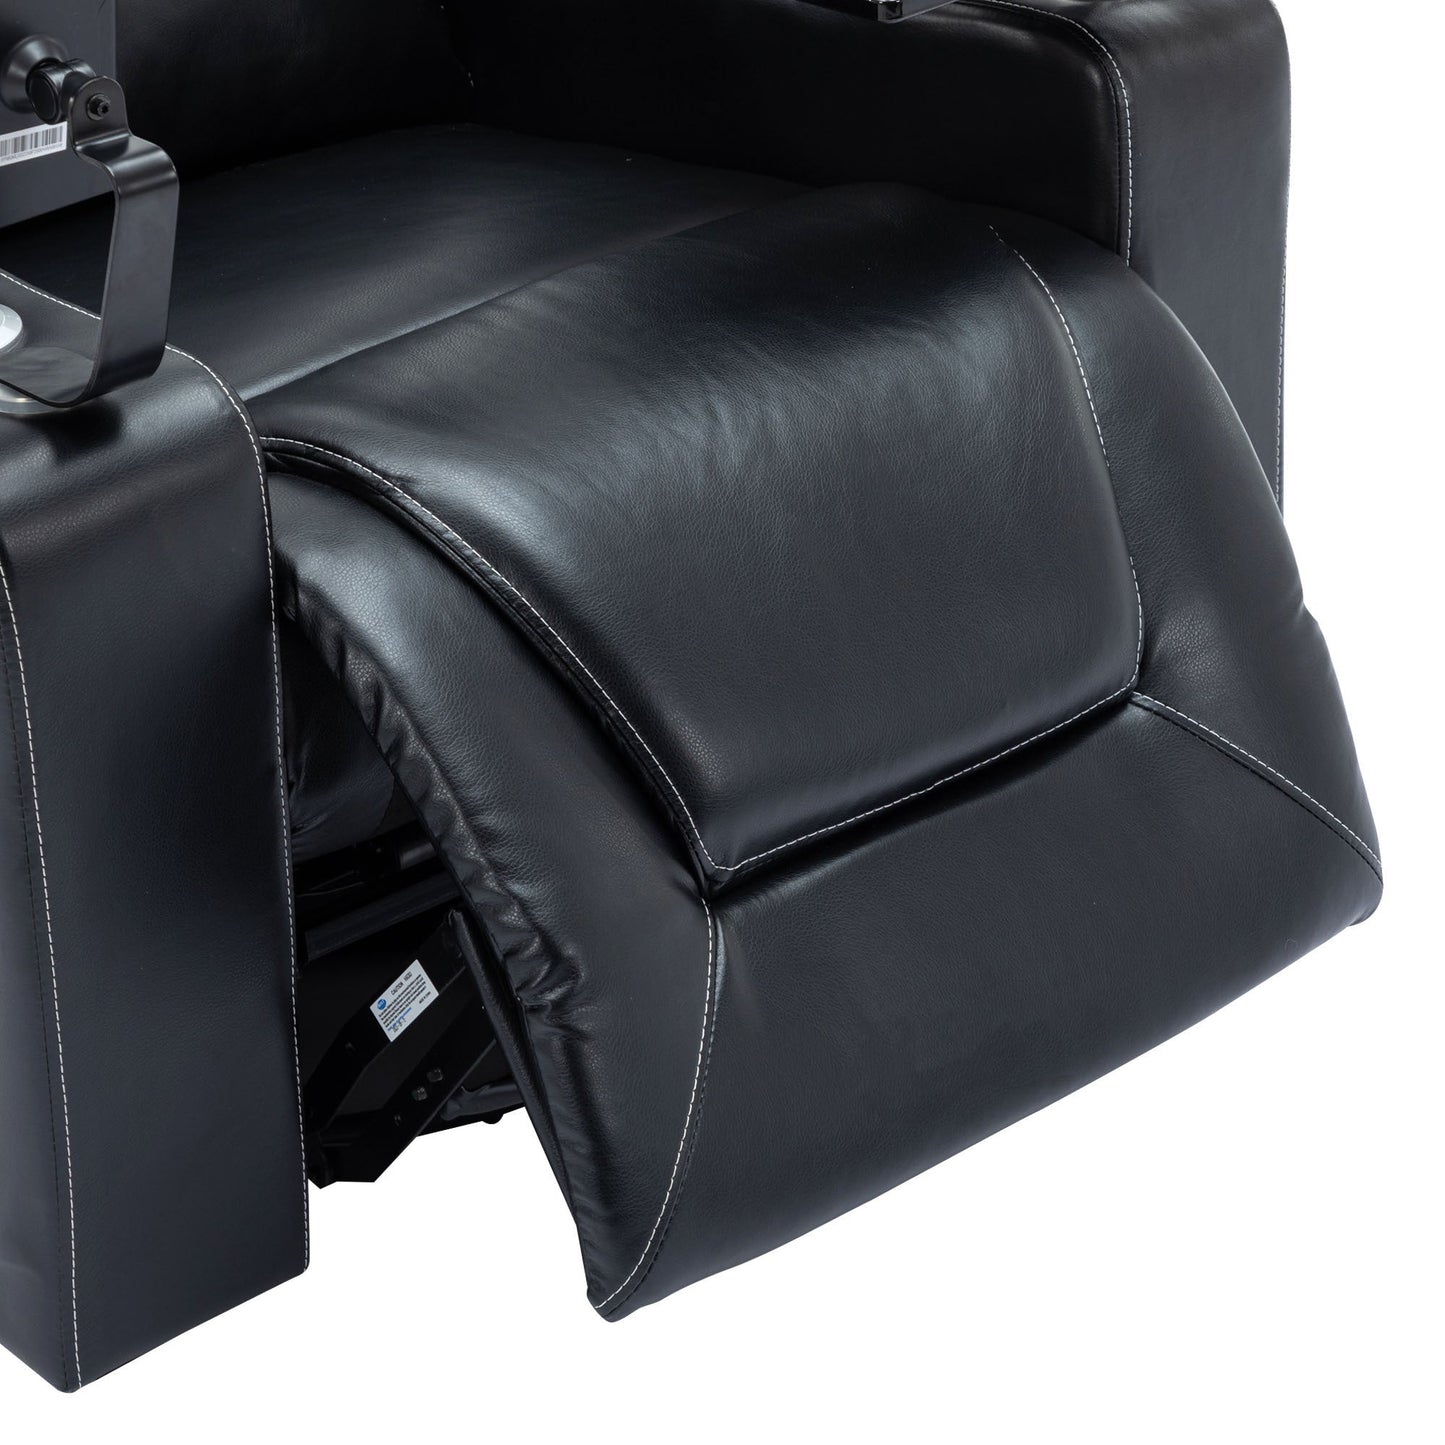 270 Degree Swivel PU Leather Power Recliner Individual Seat Home Theater Recliner with Surround Sound, Cup Holder, Removable Tray Table, Hidden Arm Storage for Living Room, Black